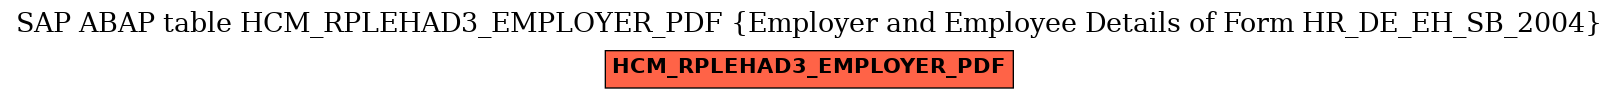 E-R Diagram for table HCM_RPLEHAD3_EMPLOYER_PDF (Employer and Employee Details of Form HR_DE_EH_SB_2004)